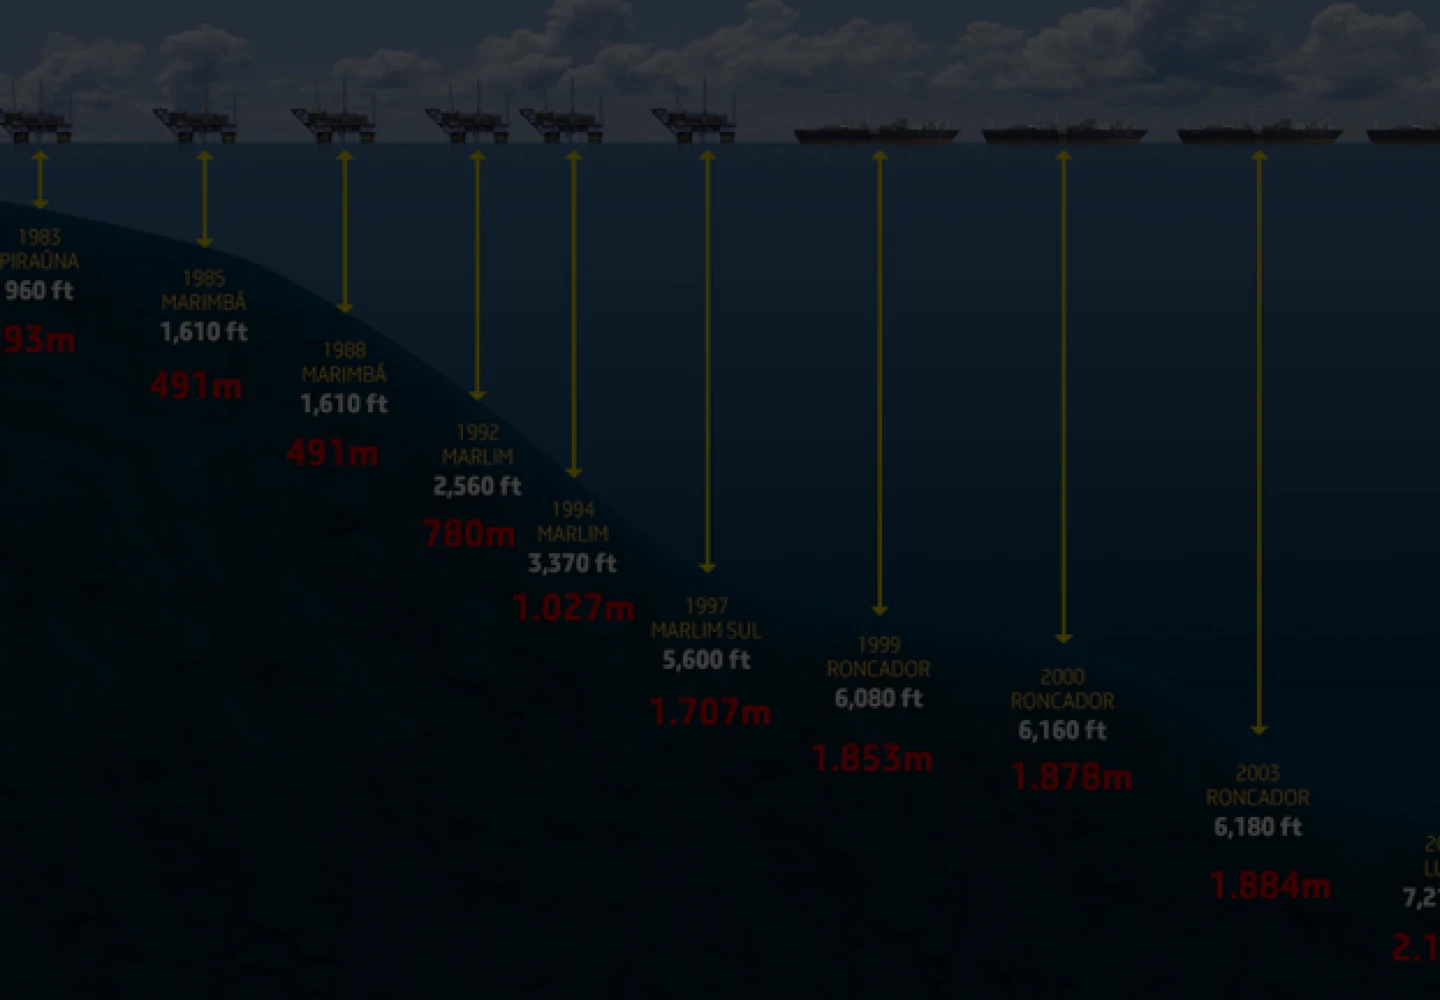 Illustration showing the increase of sea depths reached by Petrobras operations over the years.